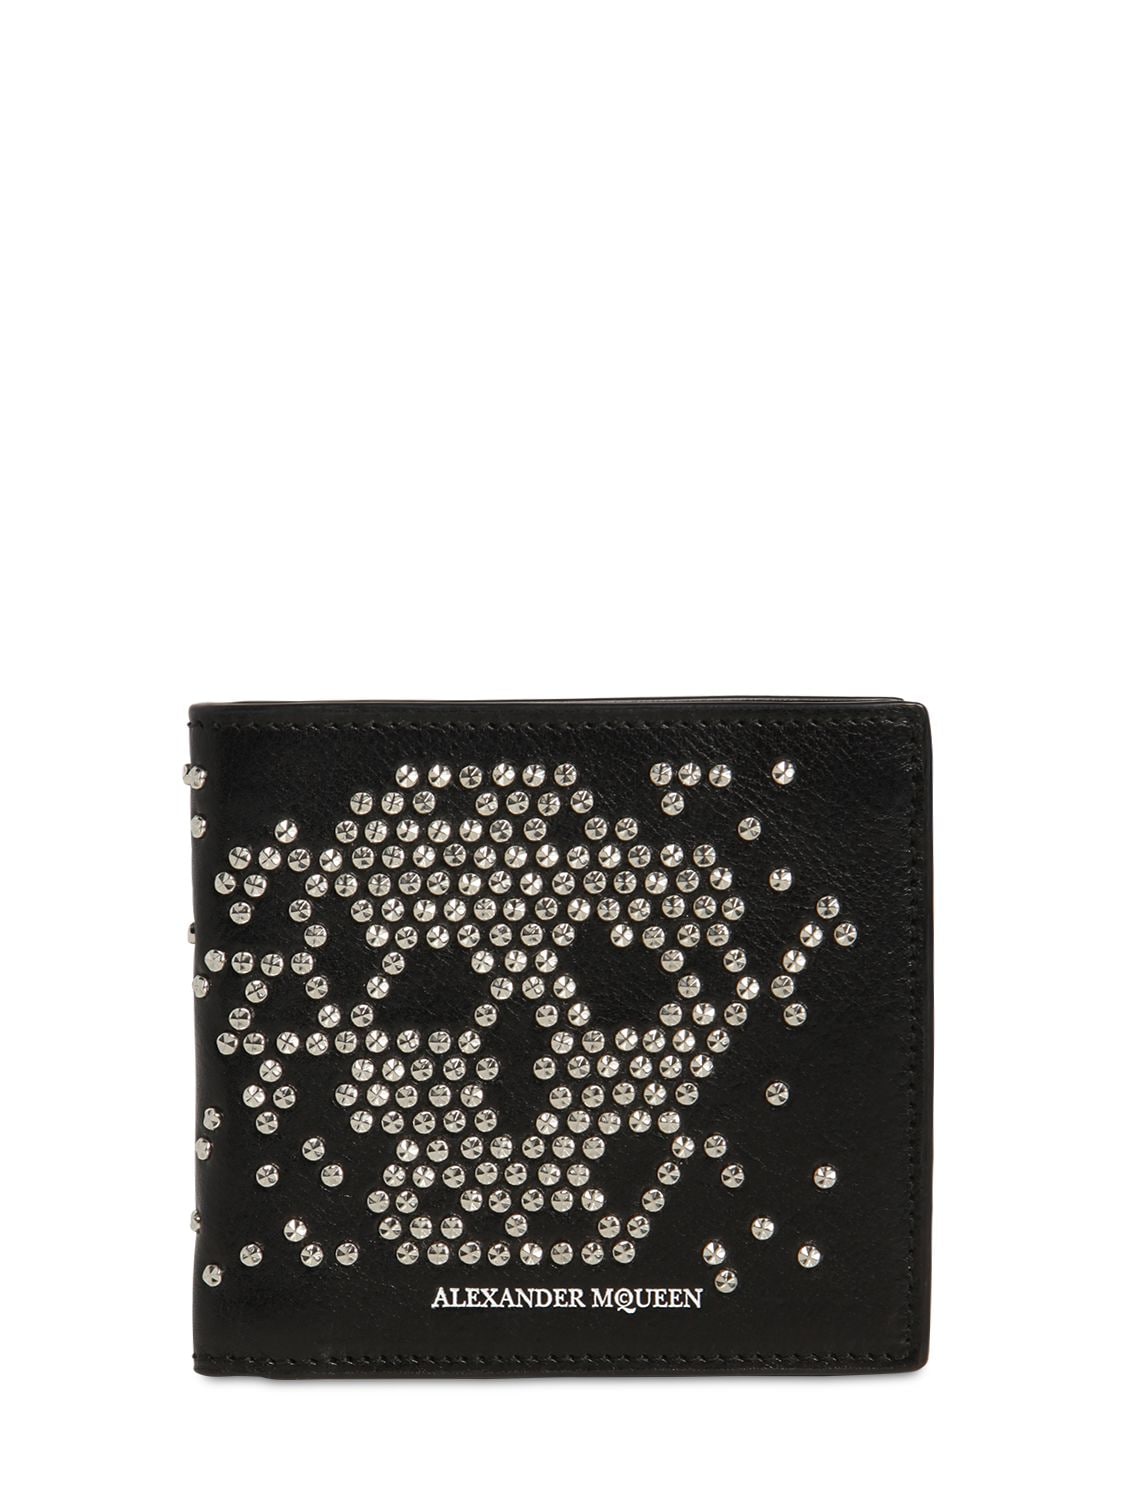 Studded Skull Classic Leather Wallet